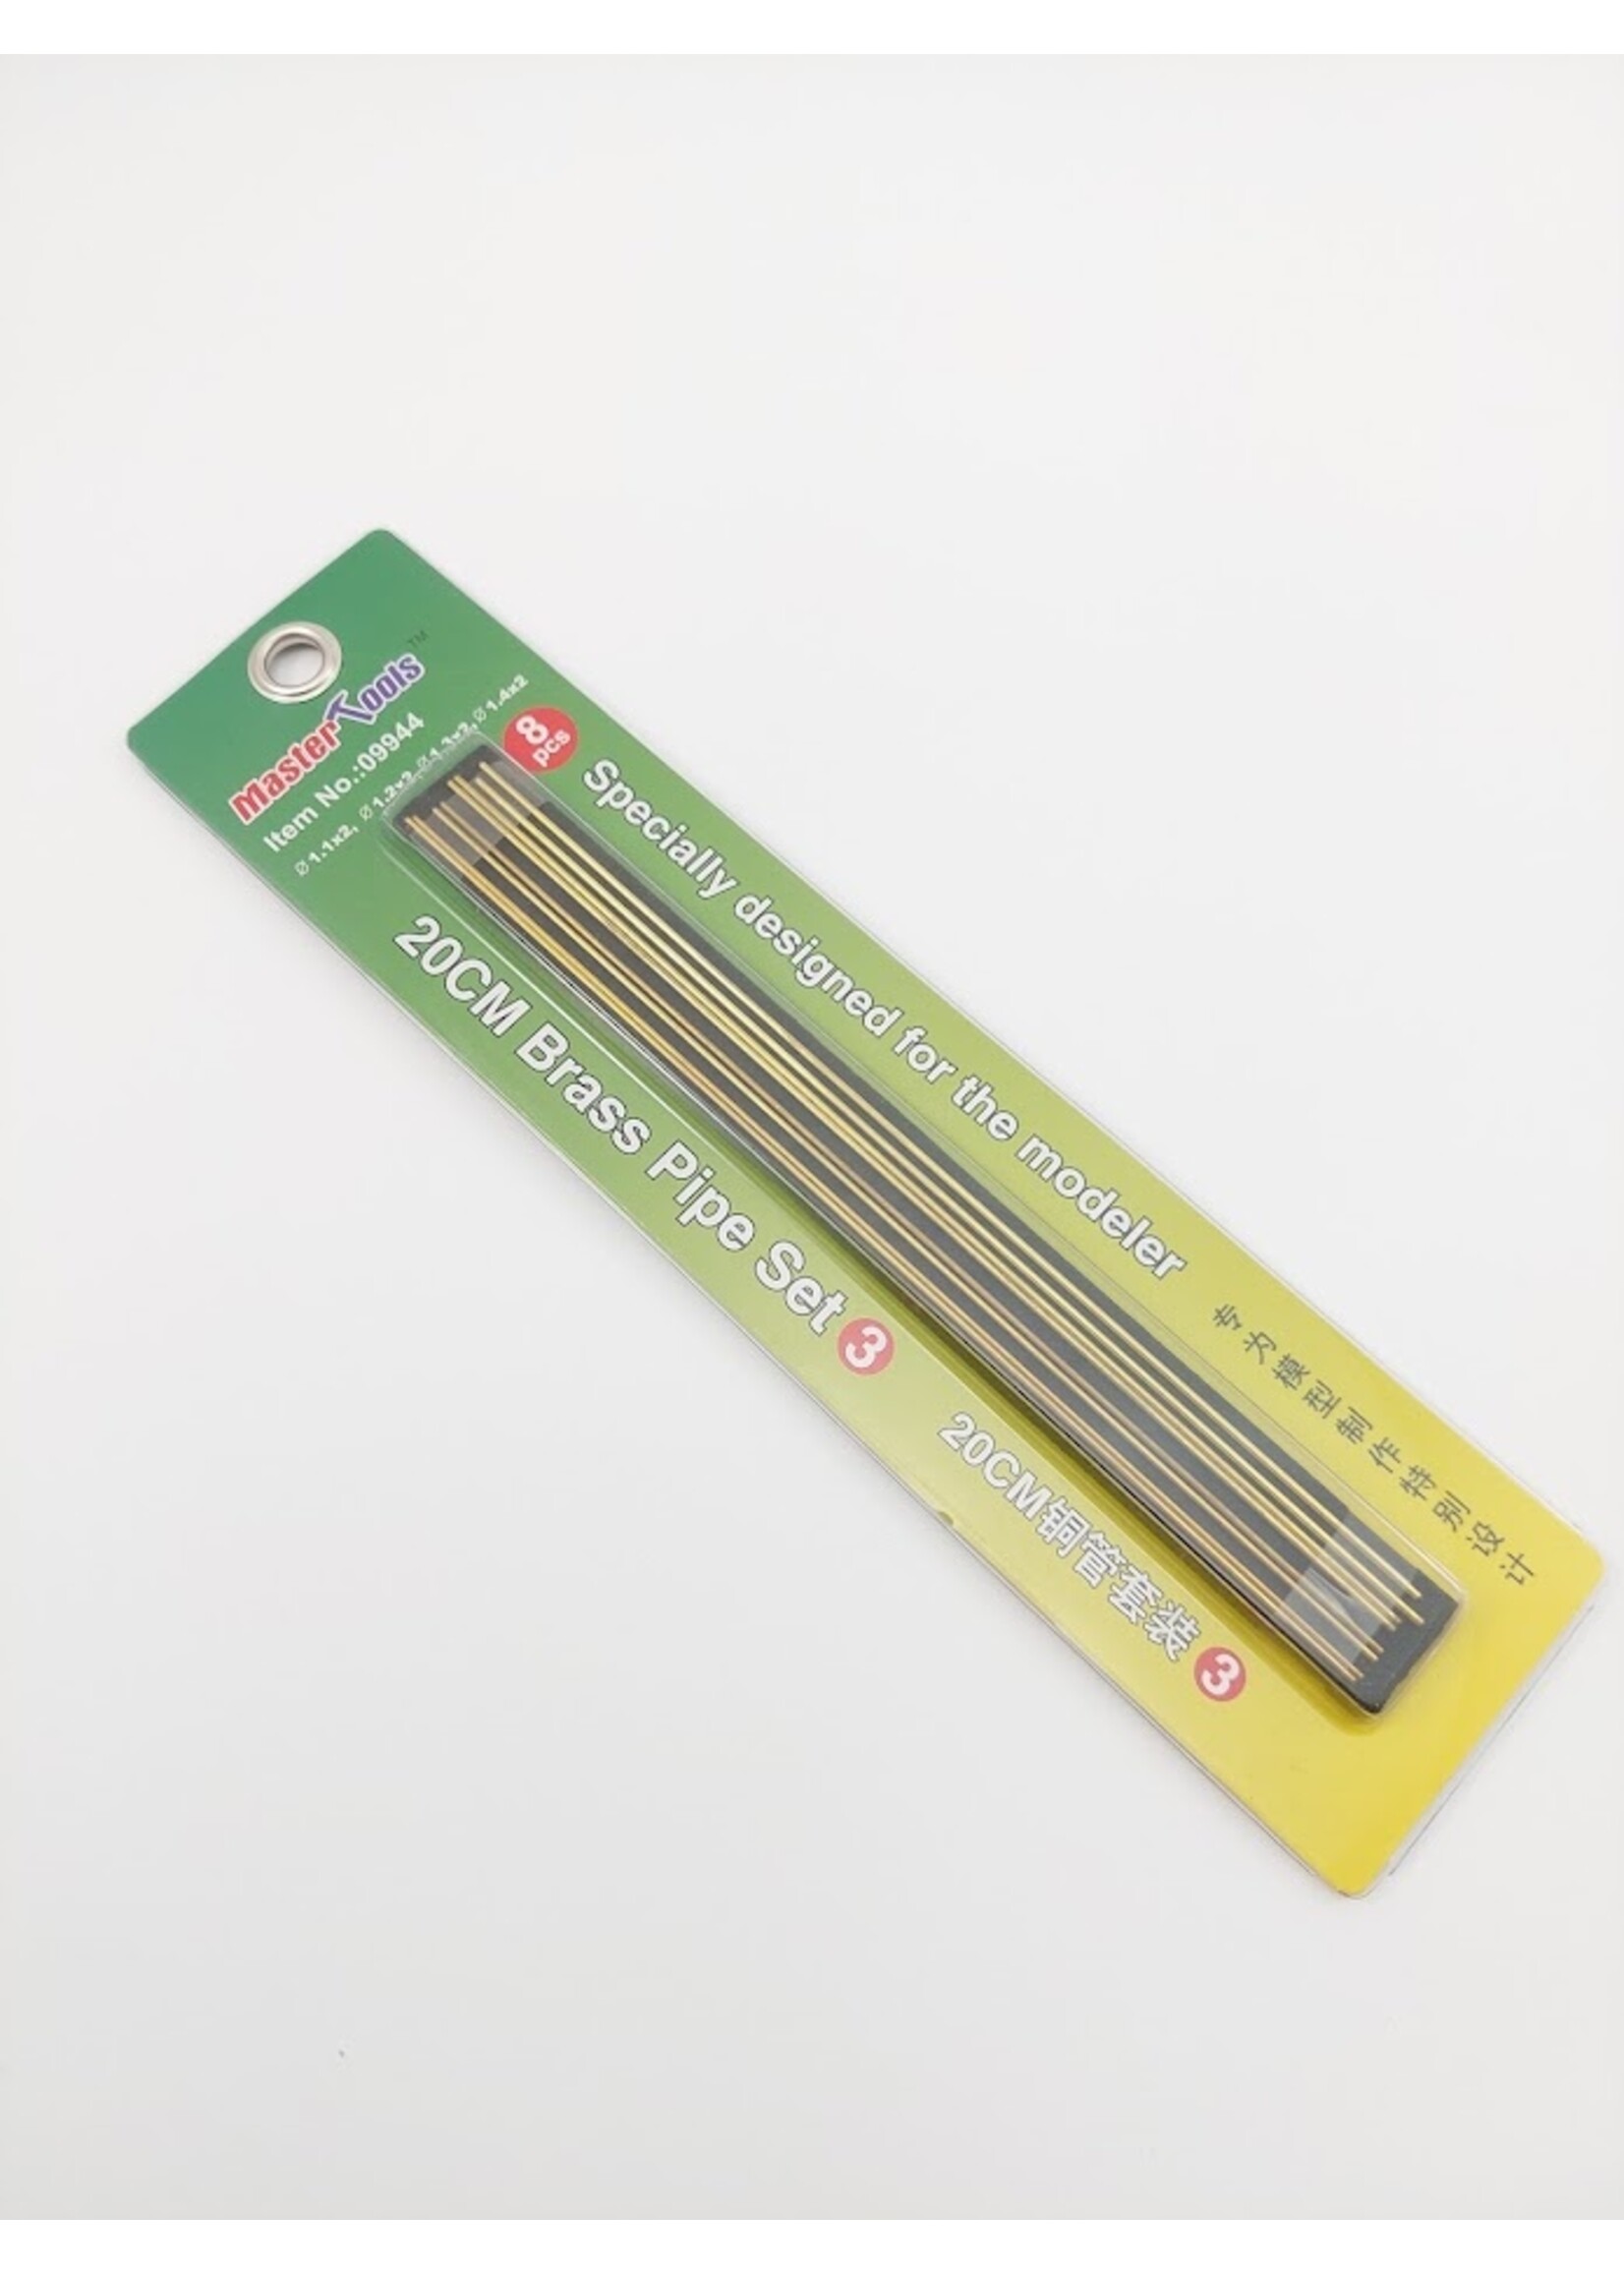 1.2 mm on a ruler